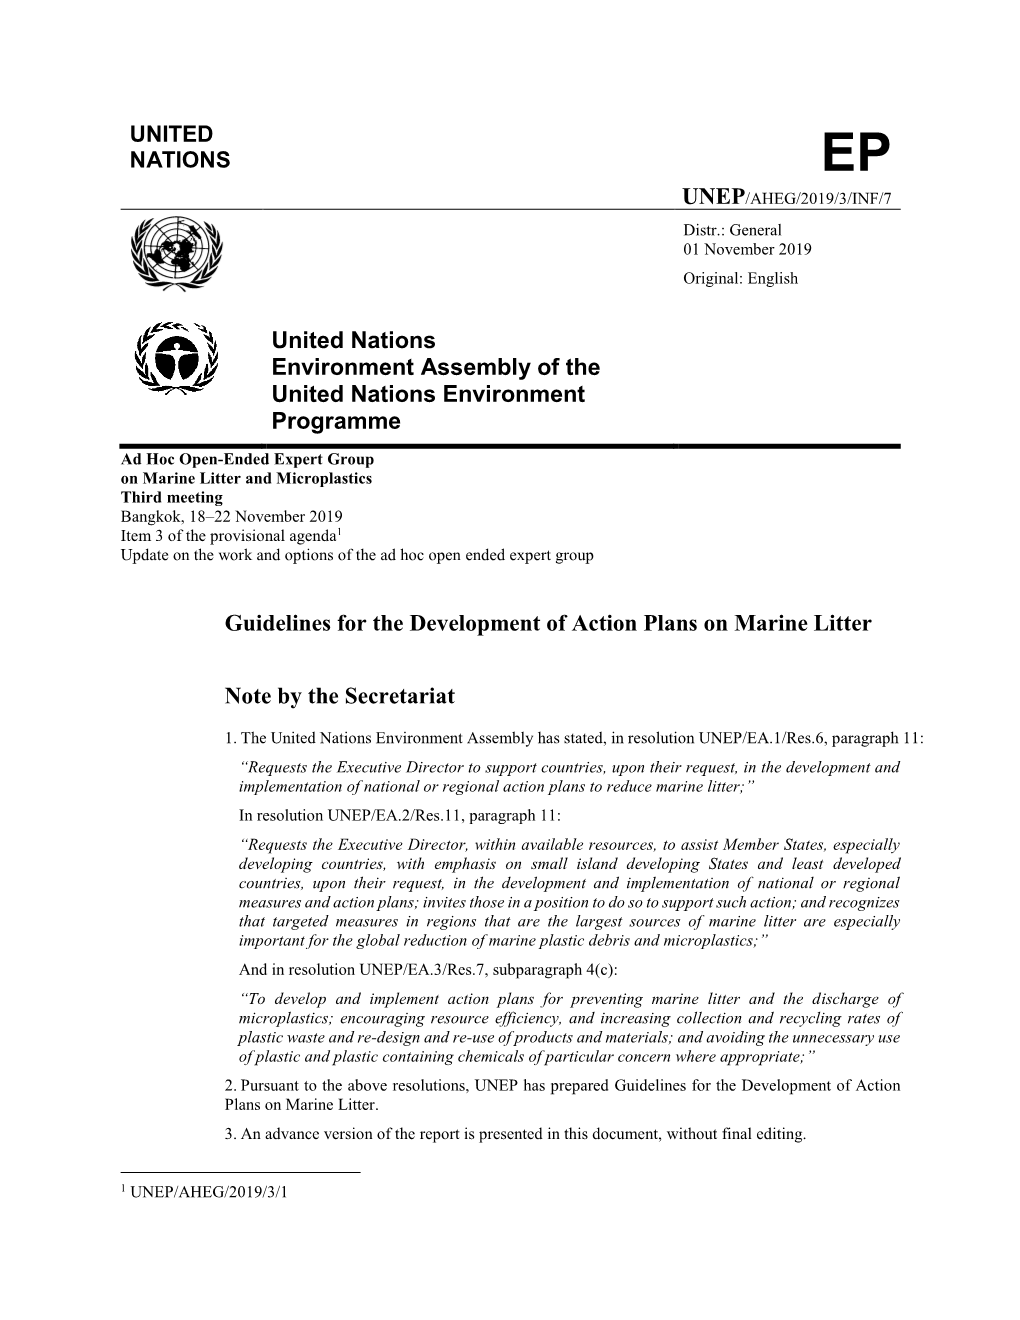 United Nations Environment Assembly of the United Nations Environment Programme Guidelines for the Development of Action Plans